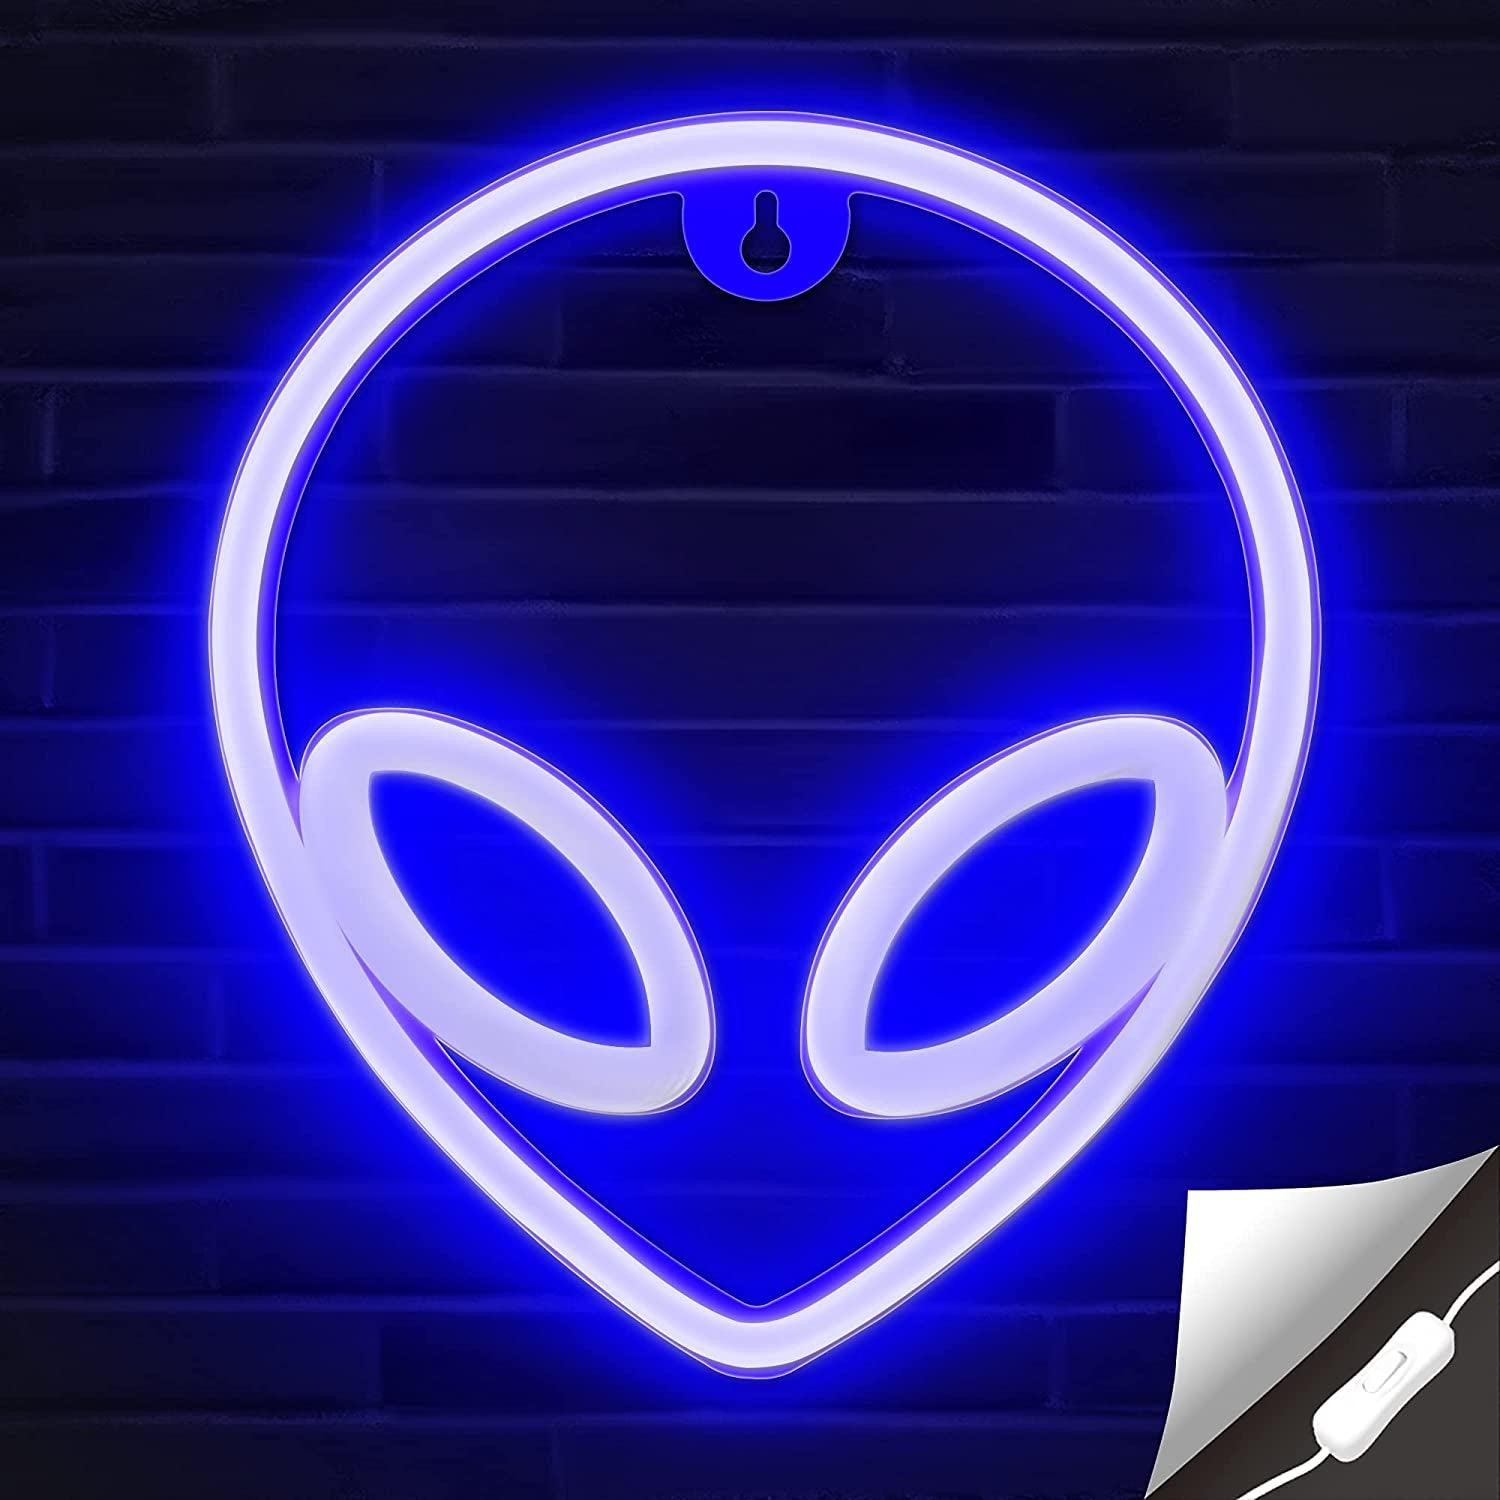 Lumoonosity Planet Neon Sign, USB Powered Planet Light Led Neon Signs with On/Off Switch, Planet Led Sign for Wall Decor, Aesthetic Hanging Saturn Neon Light, Planet Lights for Bedroom, Gaming Room